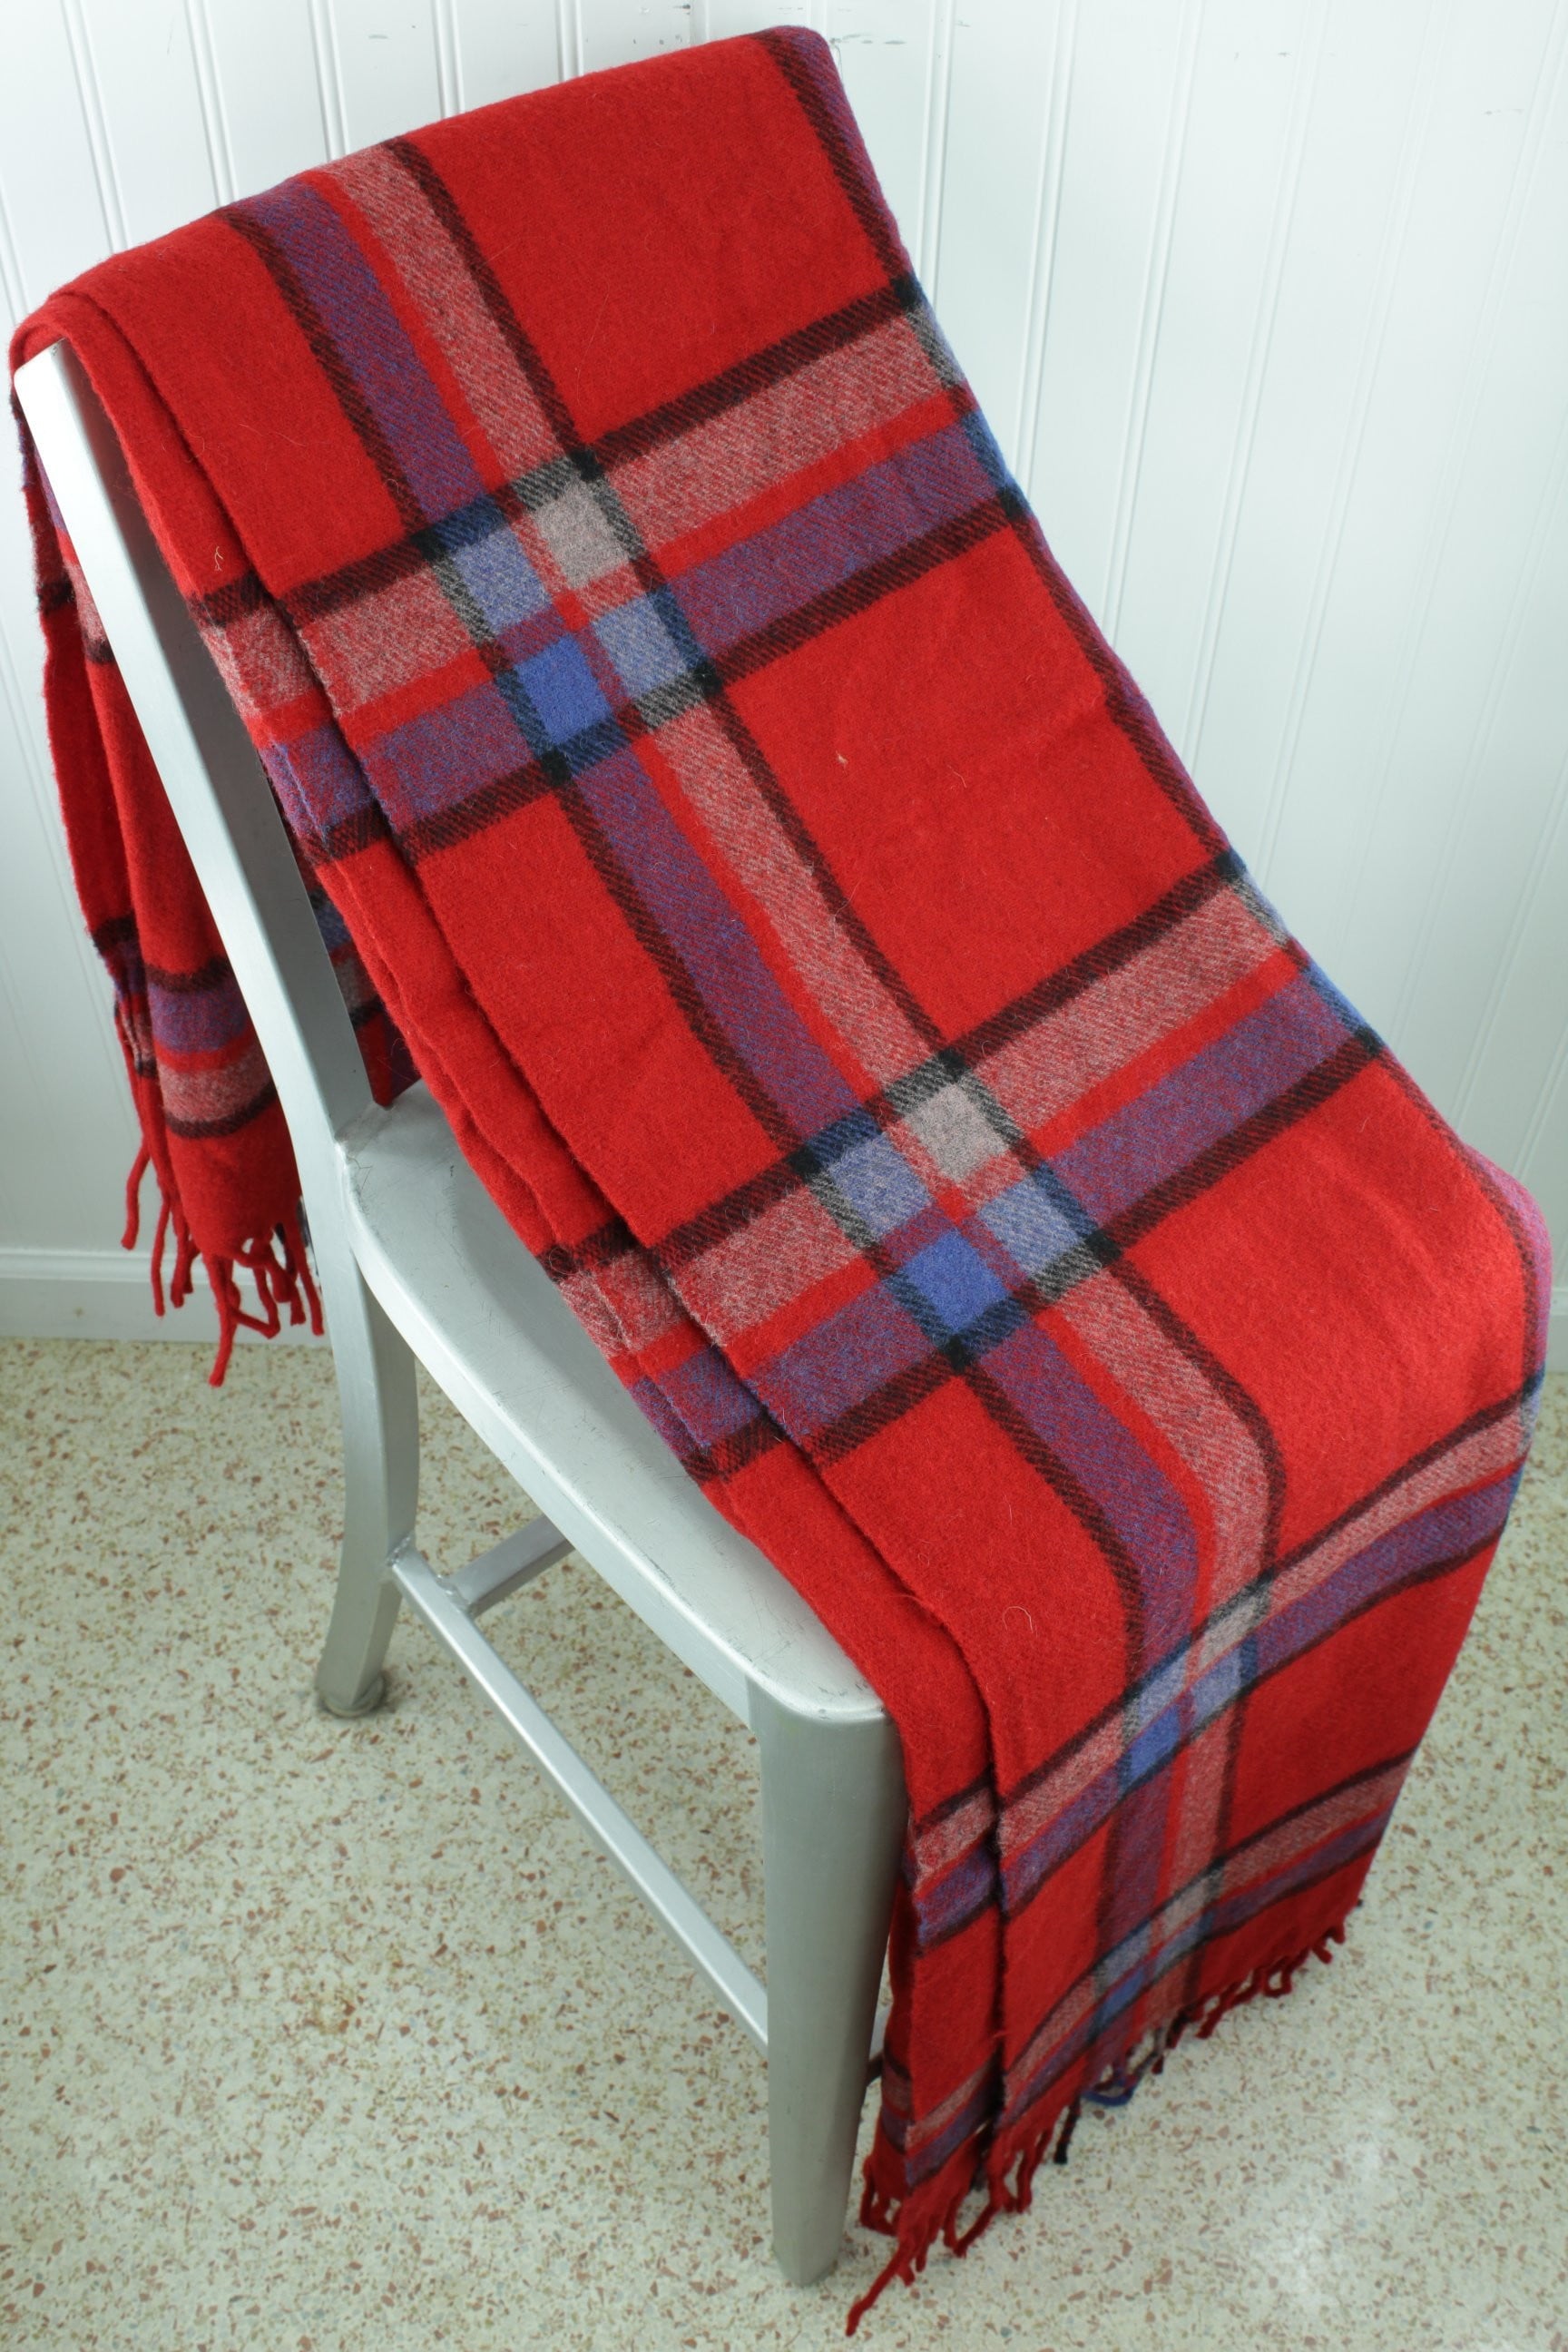 Faribo Wool Vintage Stadium Blanket with Carrier Vintage Red Plaid Fluff Loomed soft